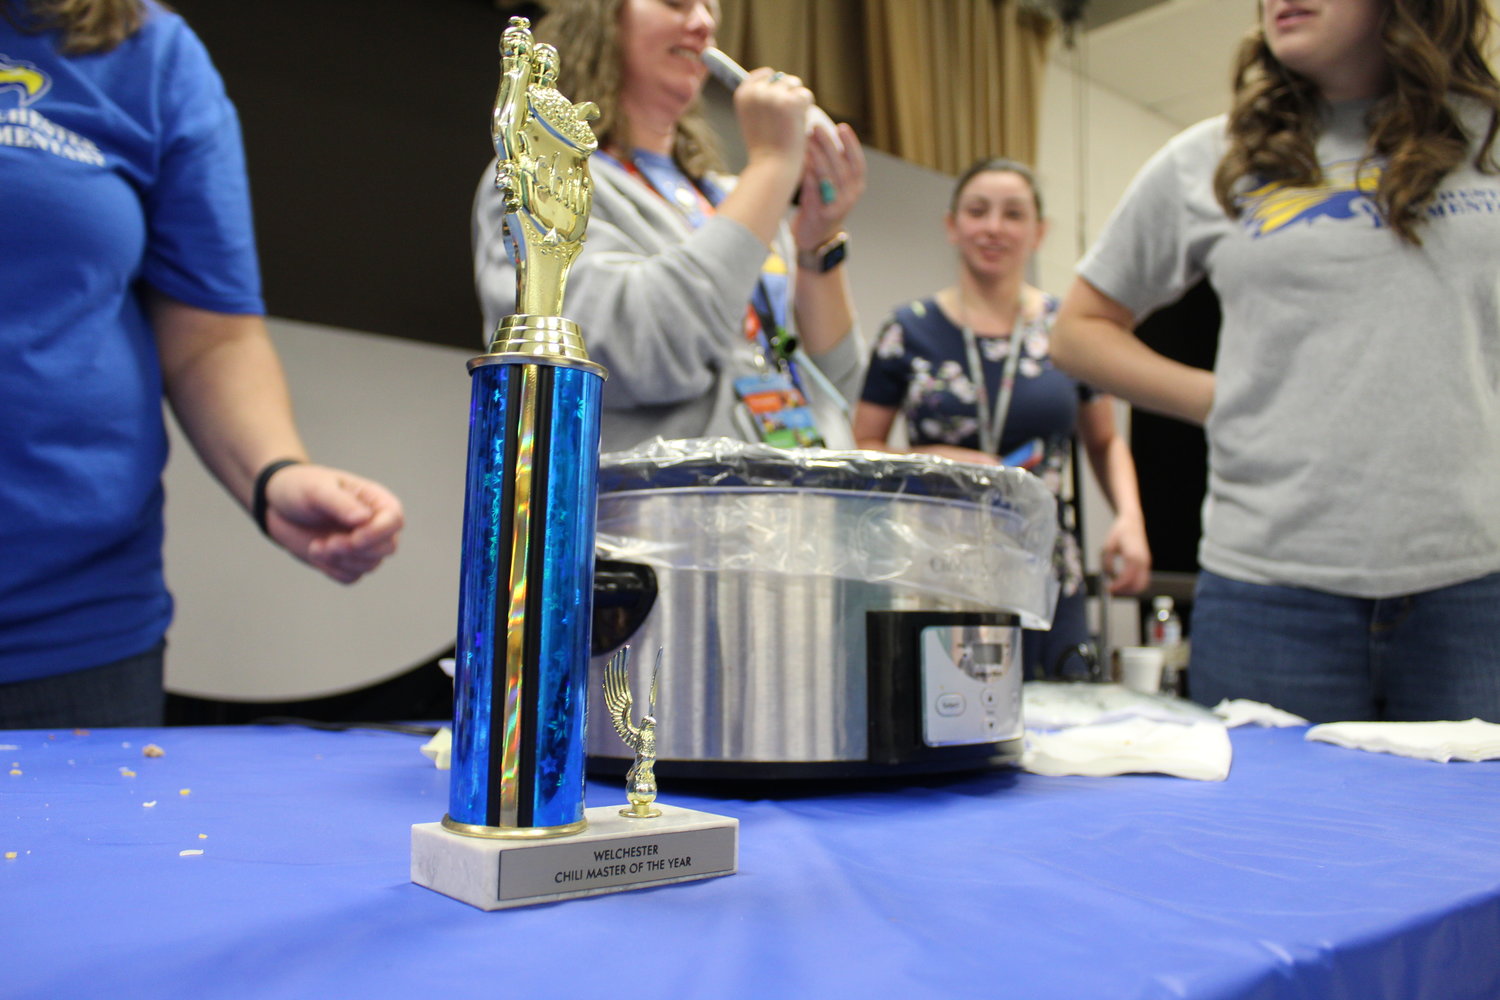 Welchester Elementary School hosts 20th annual chili cookoff fundraiser